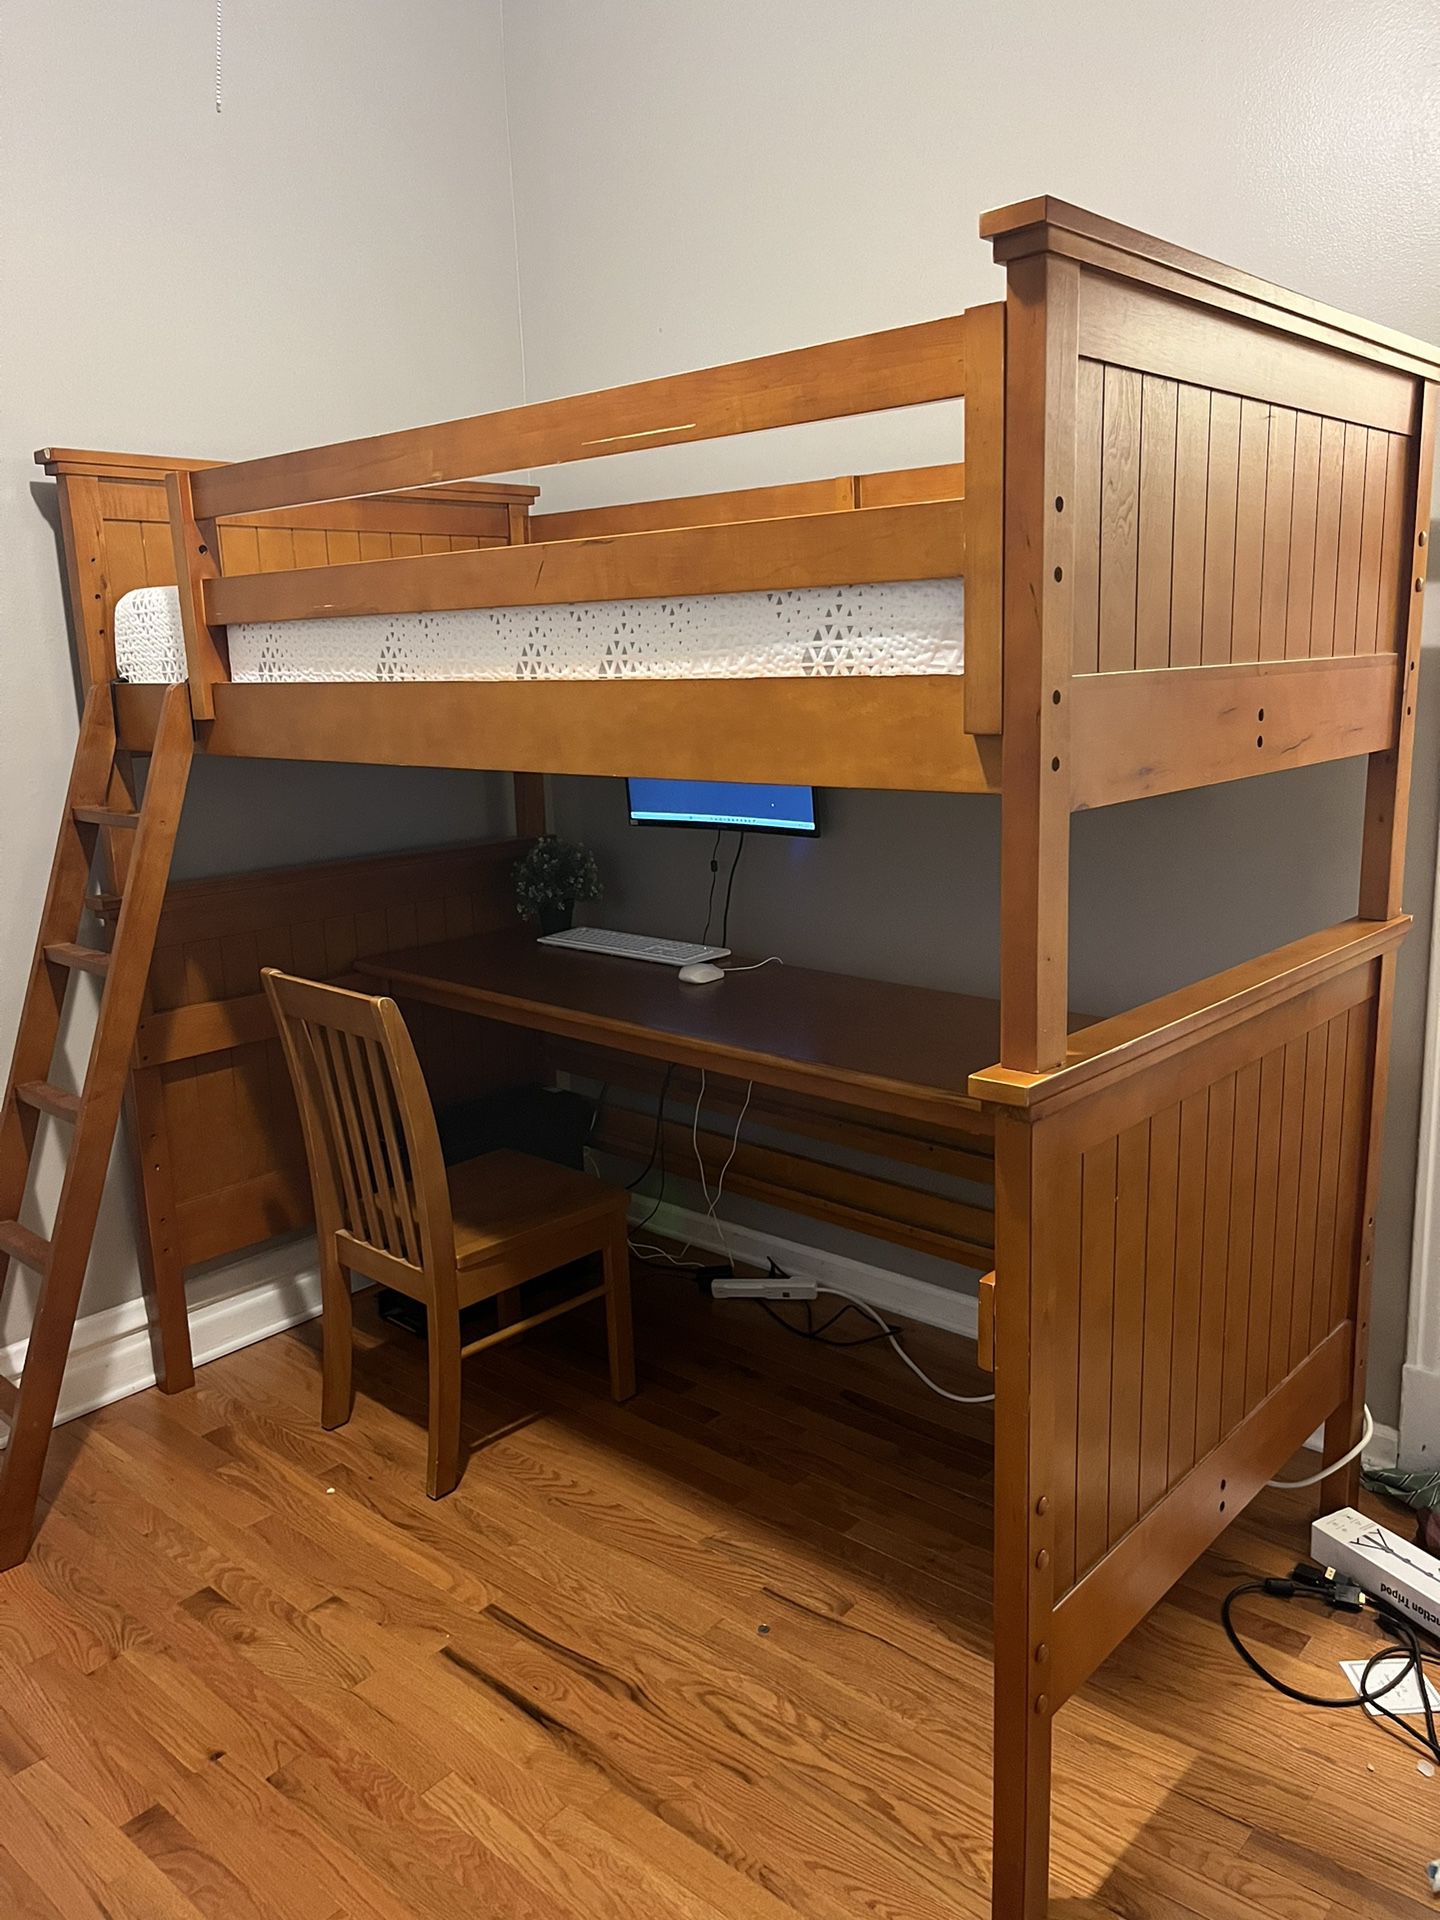 Twin Bed Loft Bed And Desk